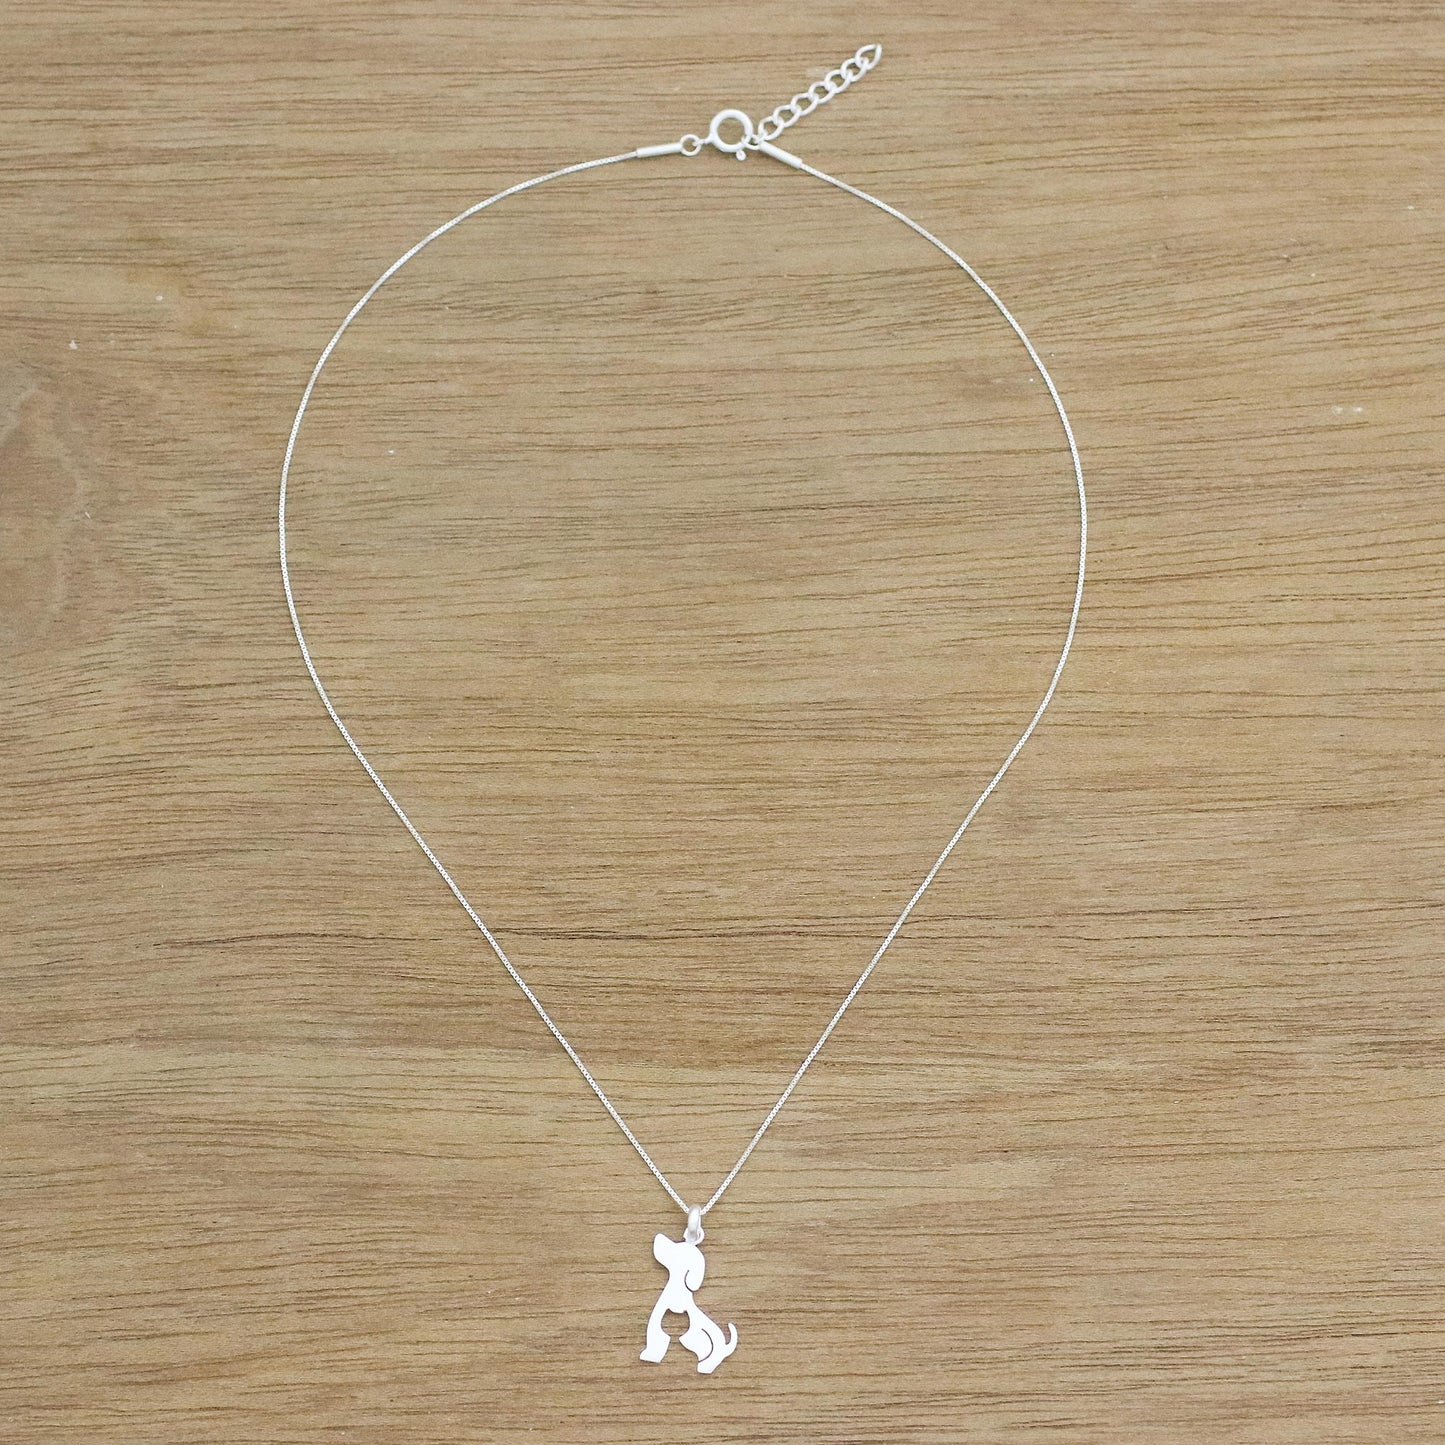 Steadfast Companions Dog and Cat Sterling Silver Pendant Necklace from Thailand